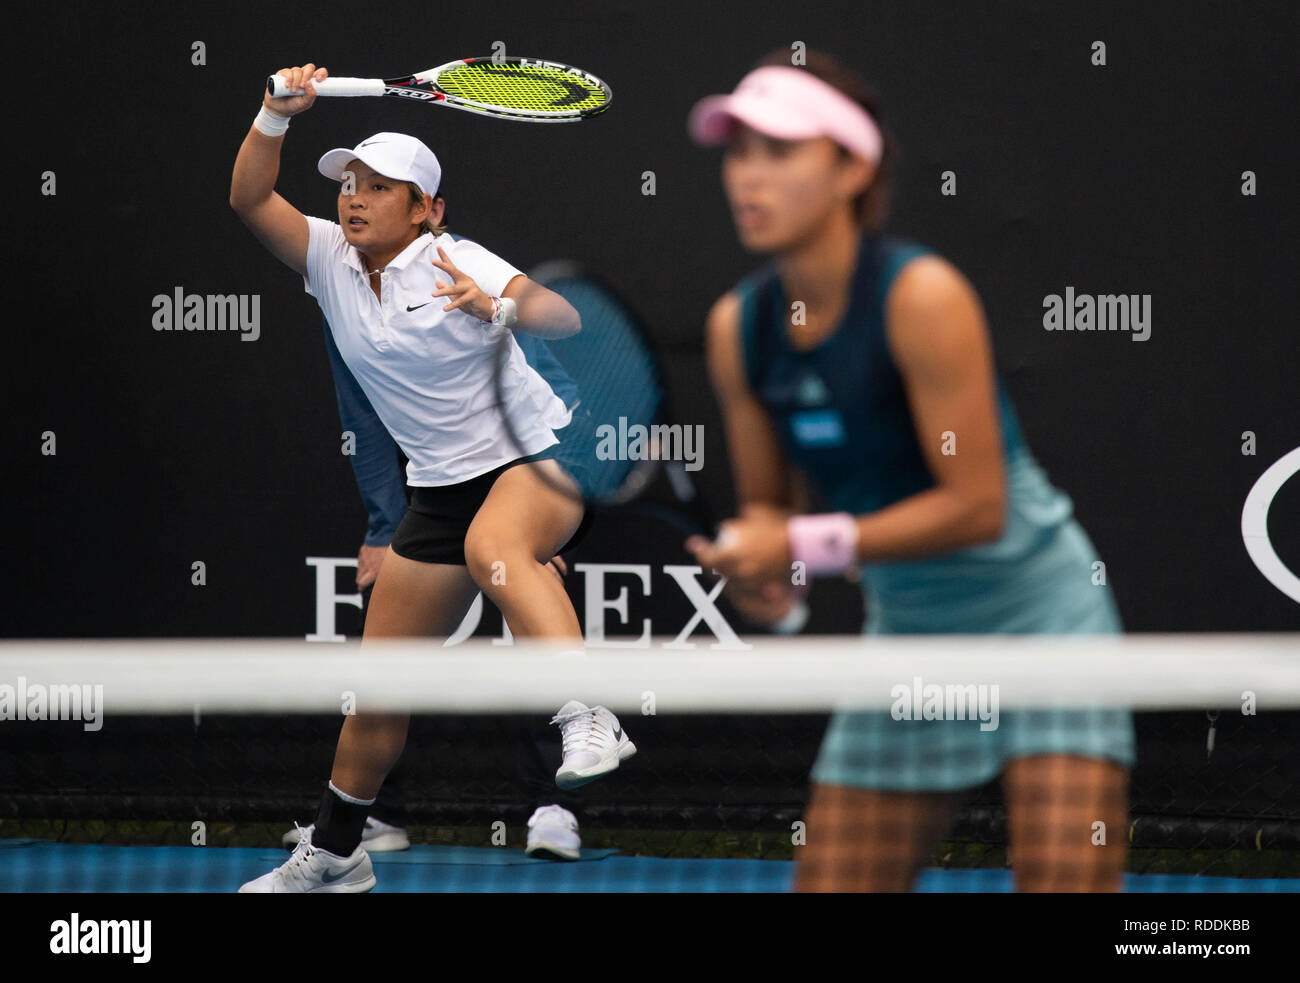 Melbouren, Australia. 18th Jan, 2019. Wang Qiang/Jiang Xinyu (L) of China compete during their women's doubles second round match against Chan Latisha/ Chan Hao-Ching of Chinese Taipei at the Australian Open in Melbourne, Australia, Jan. 18, 2019. Credit: Bai Xue/Xinhua/Alamy Live News Stock Photo